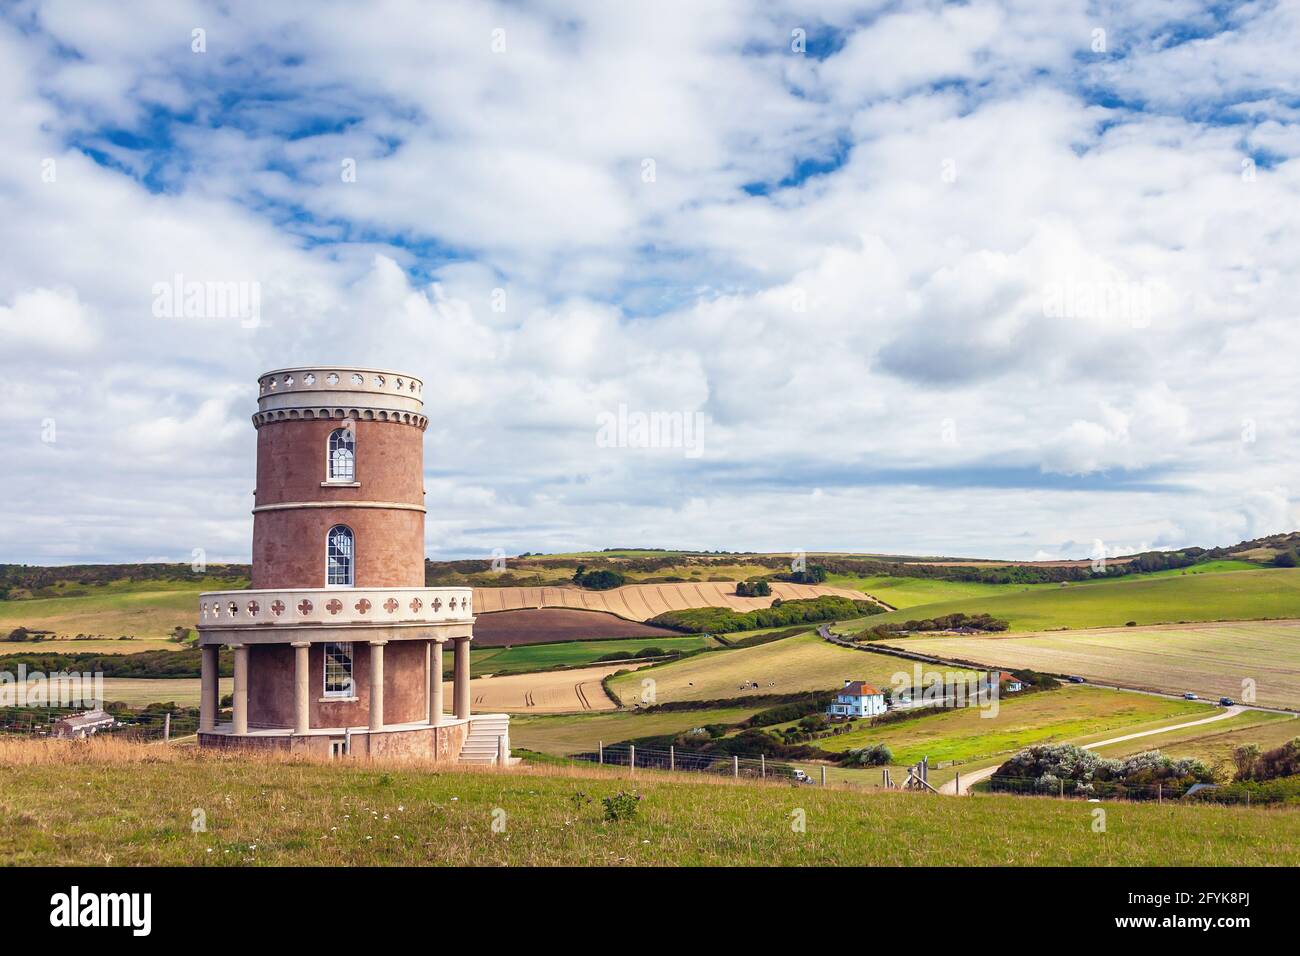 Clavell Tower, also known as Clavell Folly or the Kimmeridge Tower, Kimmeridge Bay in the Isle of Purbeck in Dorset. Stock Photo